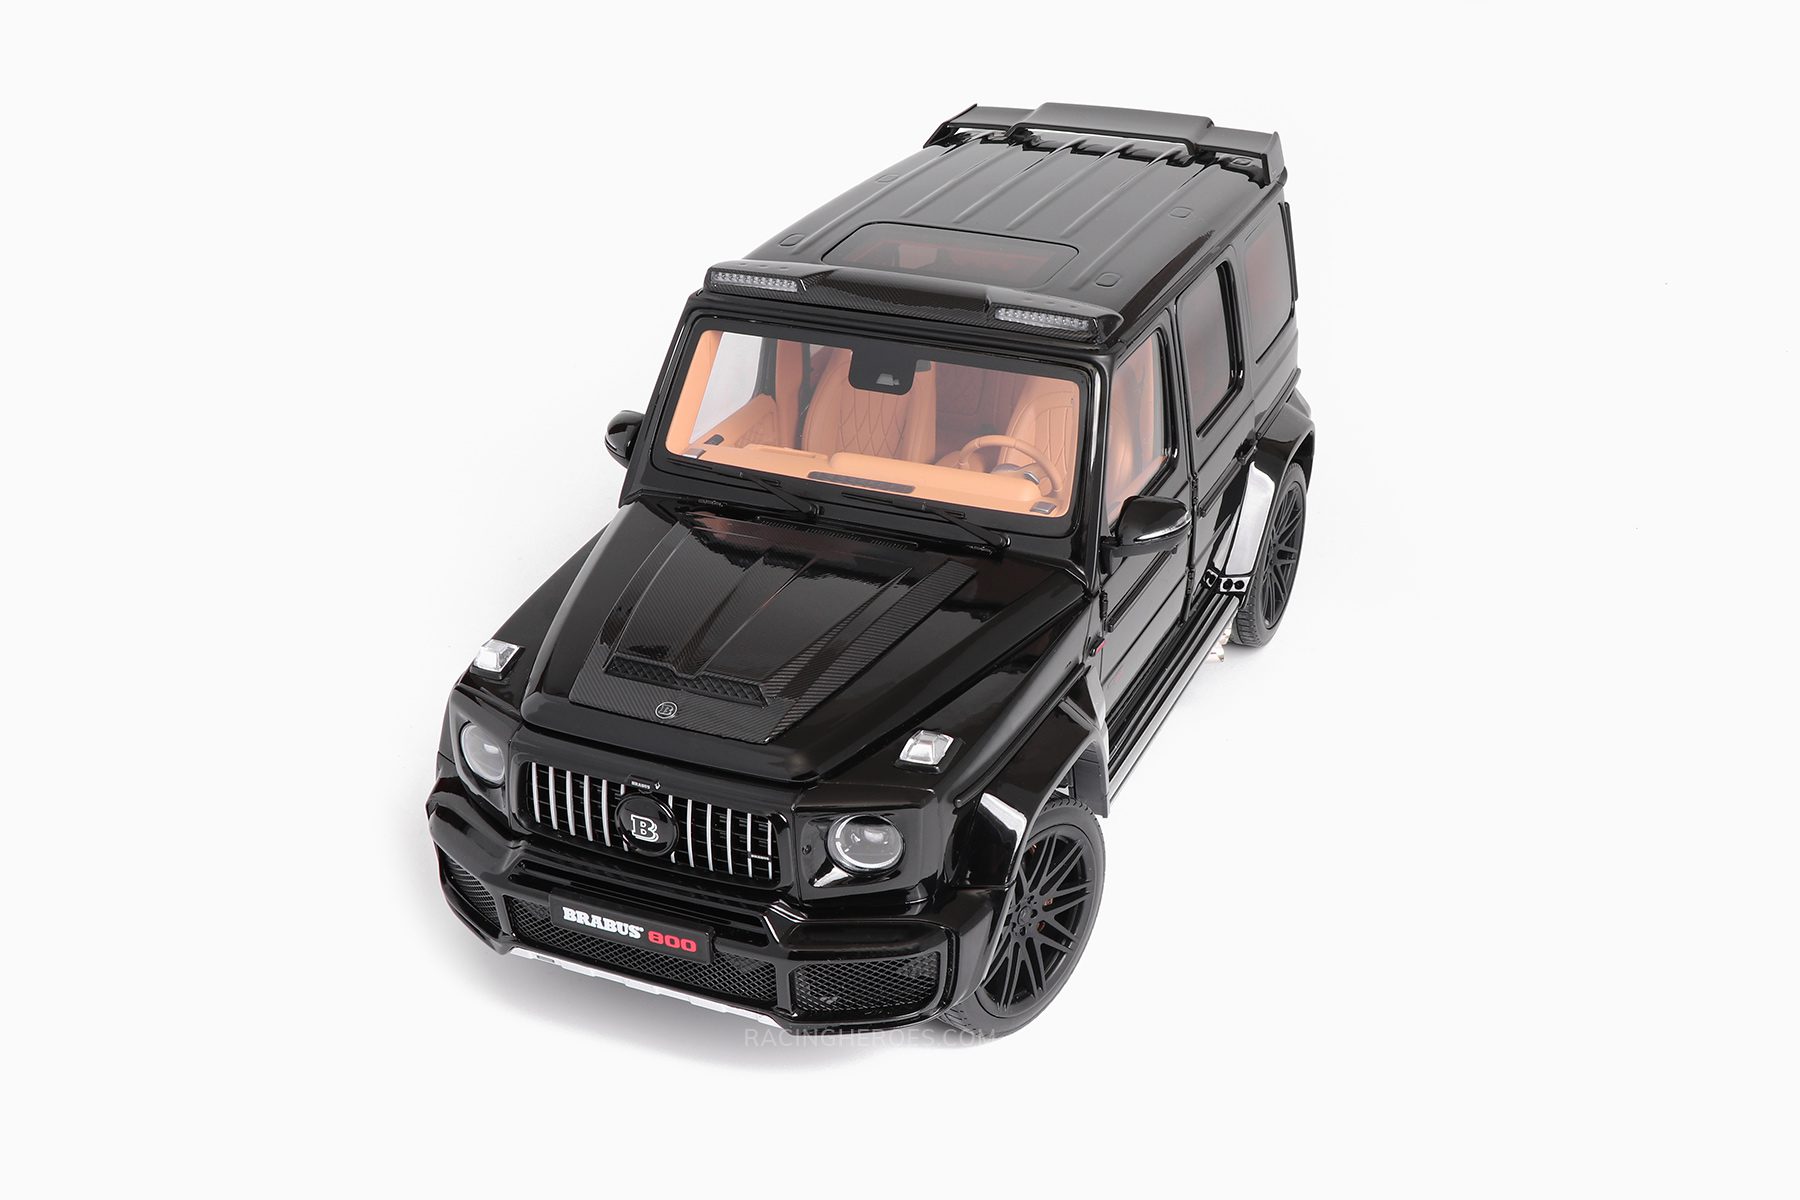 Brabus Widestar Mercedes G 63 1:18 Almost Real